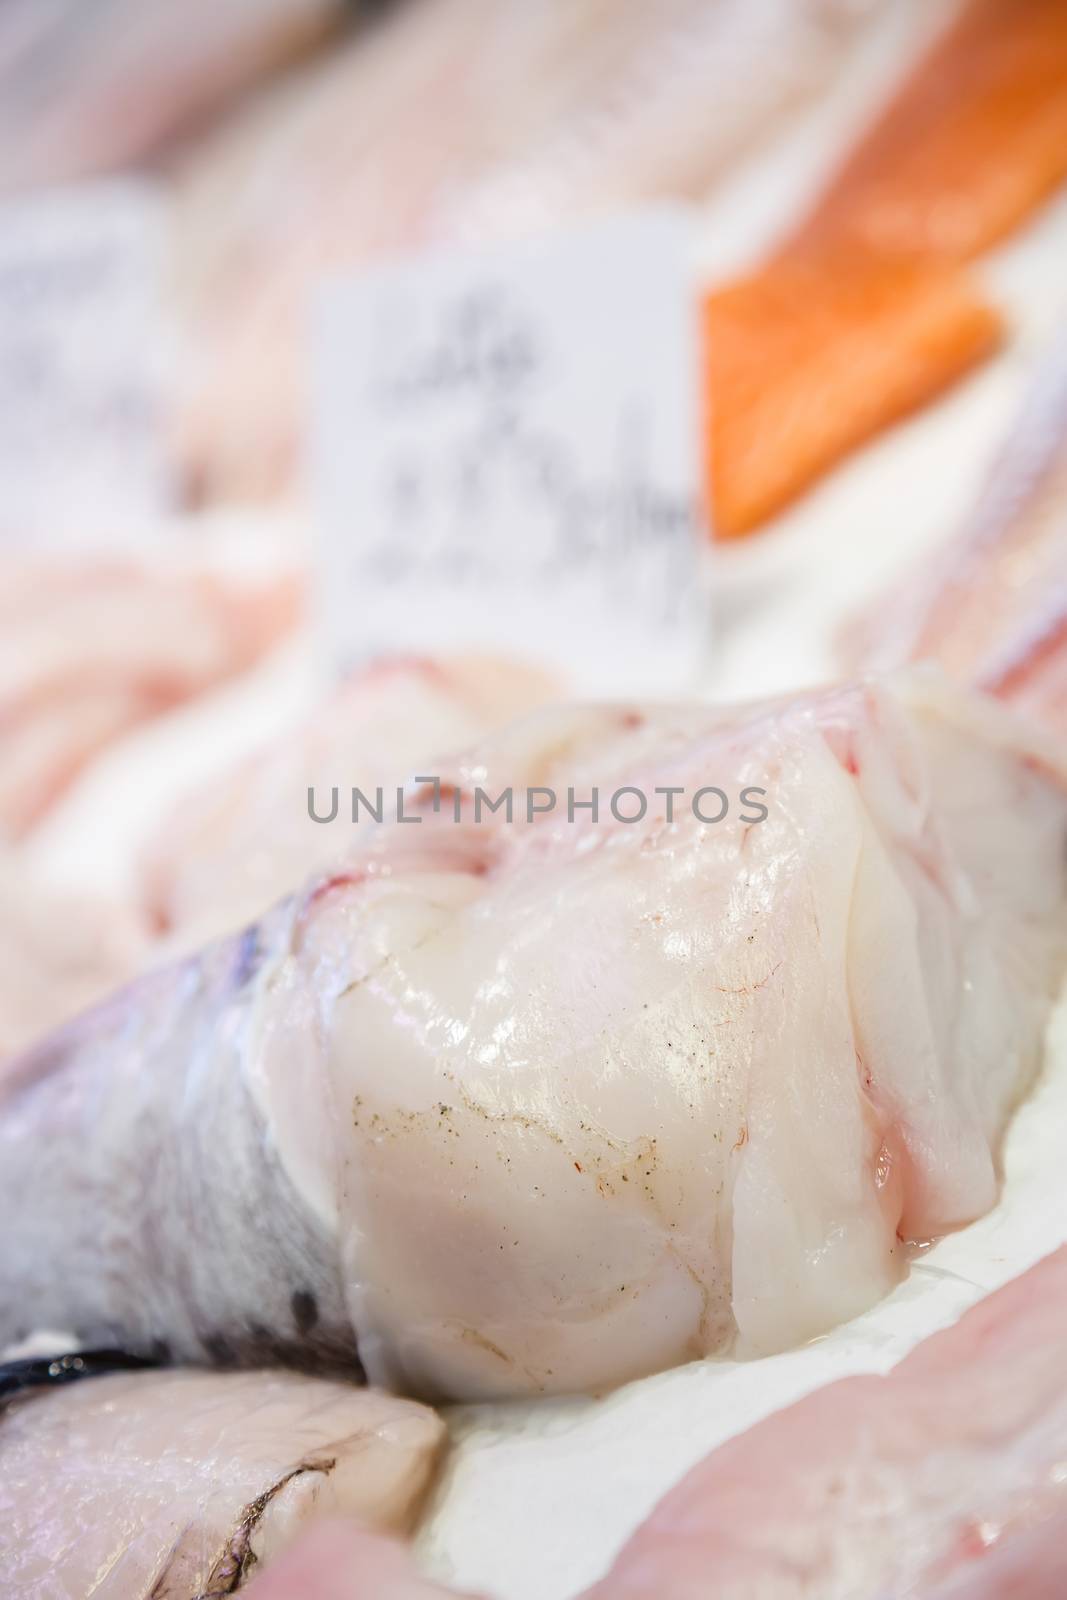 Fresh monkfish fillet on ice for sale at market with salmon on background